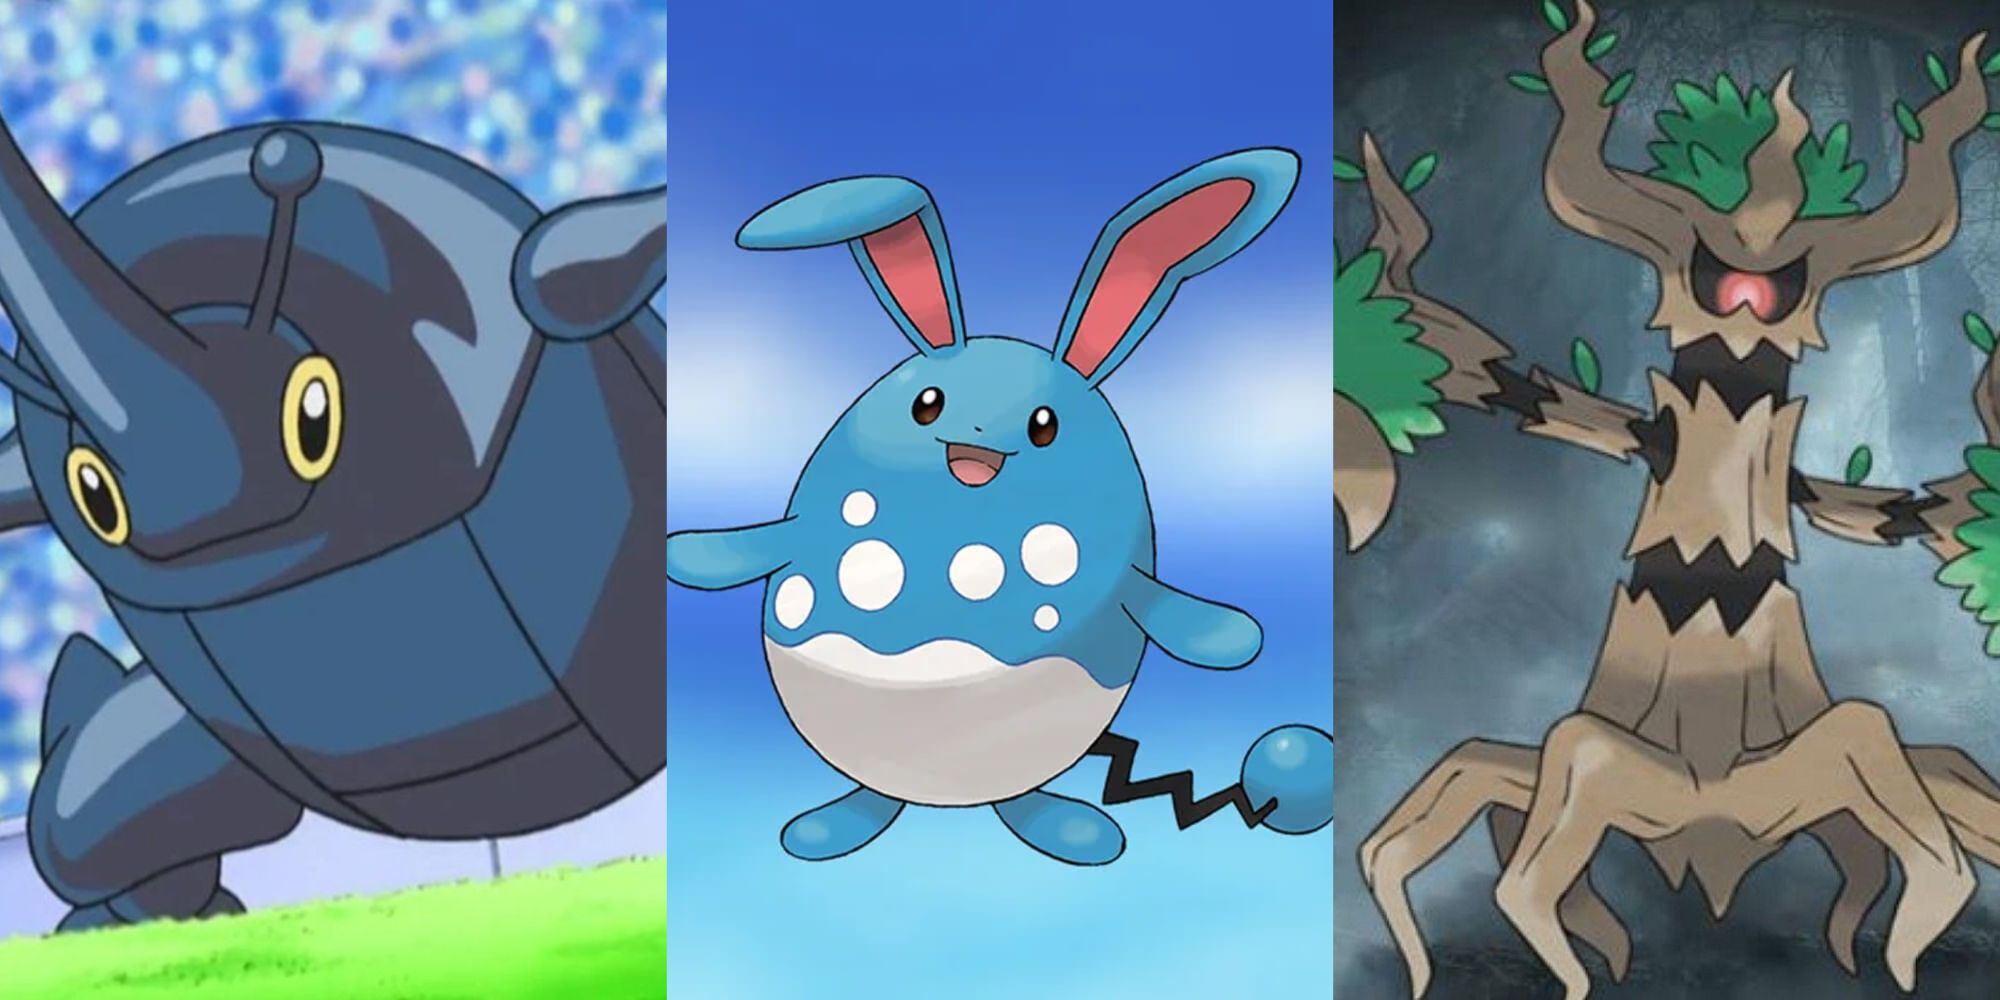 Collage of Heracross, Azumarill and Trevenant from the Pokemon Anime